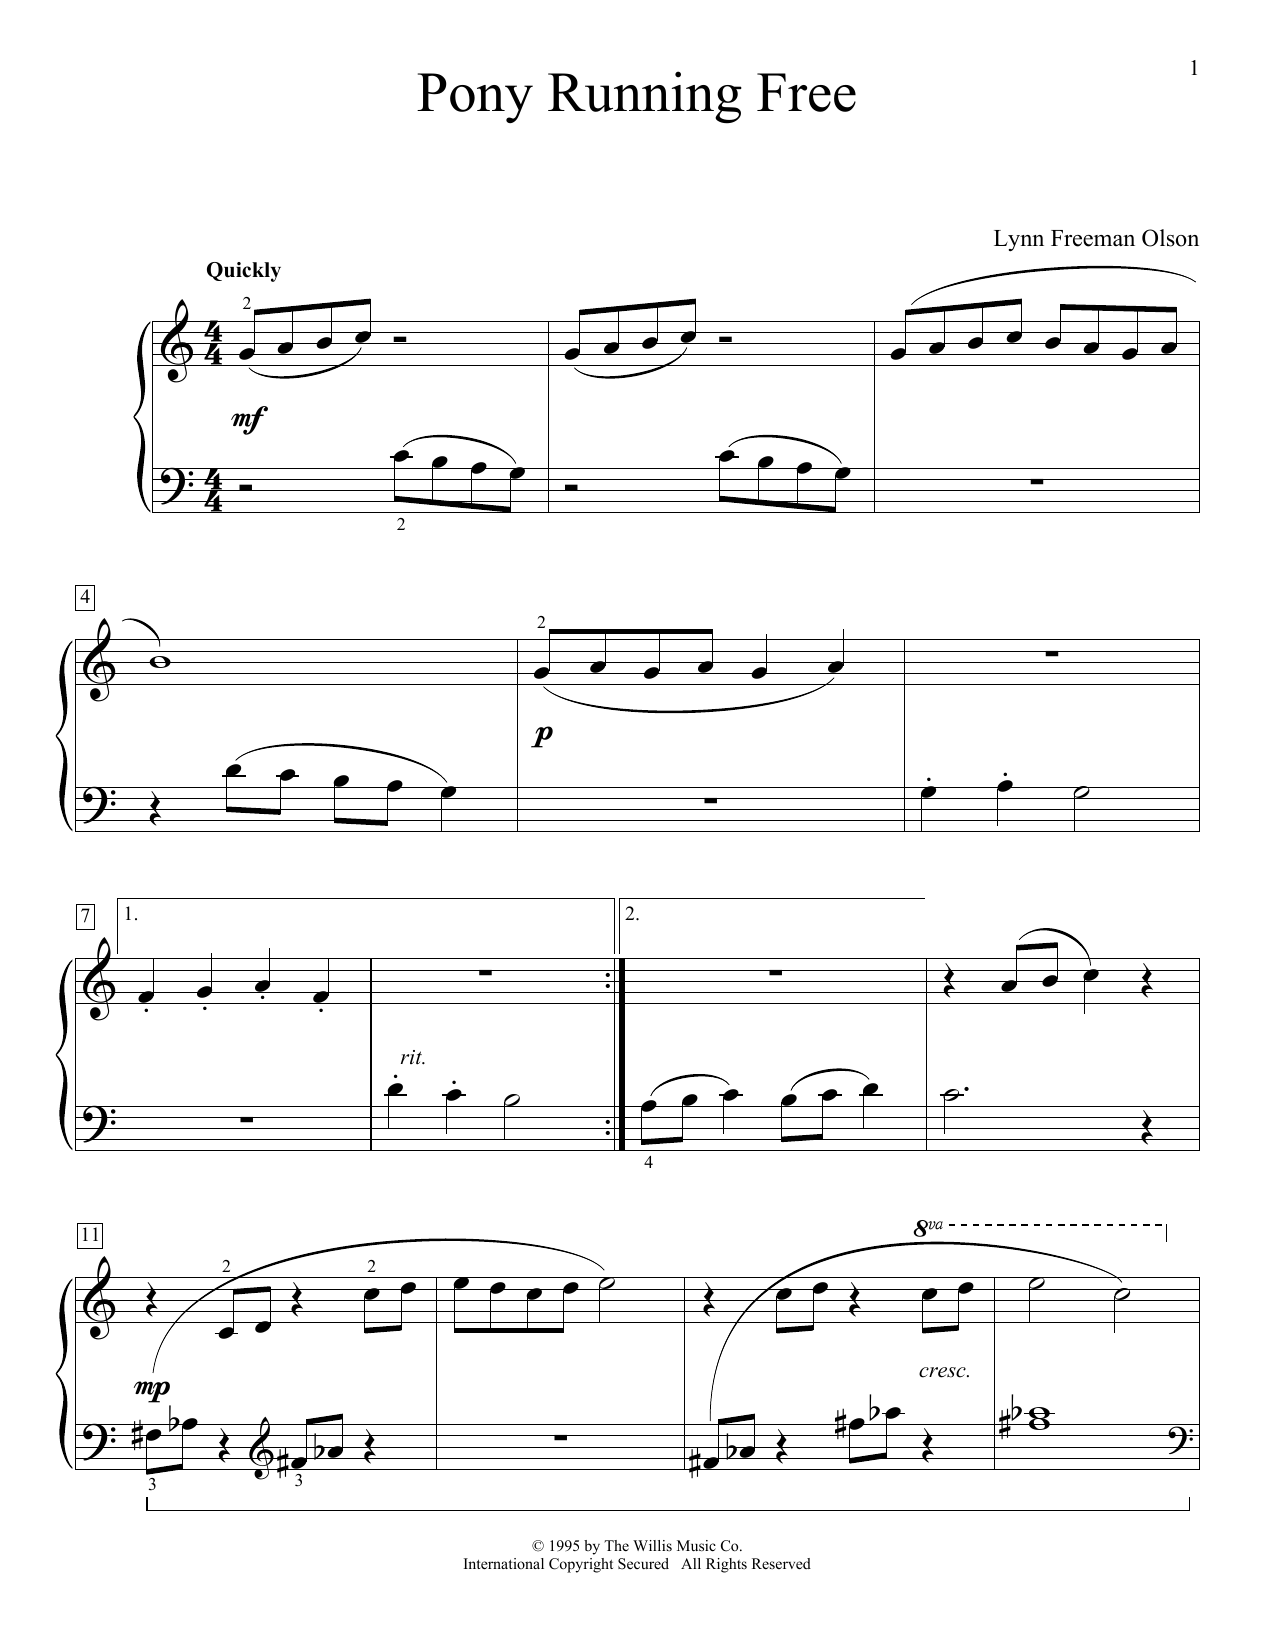 Lynn Freeman Olson Pony Running Free sheet music preview music notes and score for Educational Piano including 2 page(s)